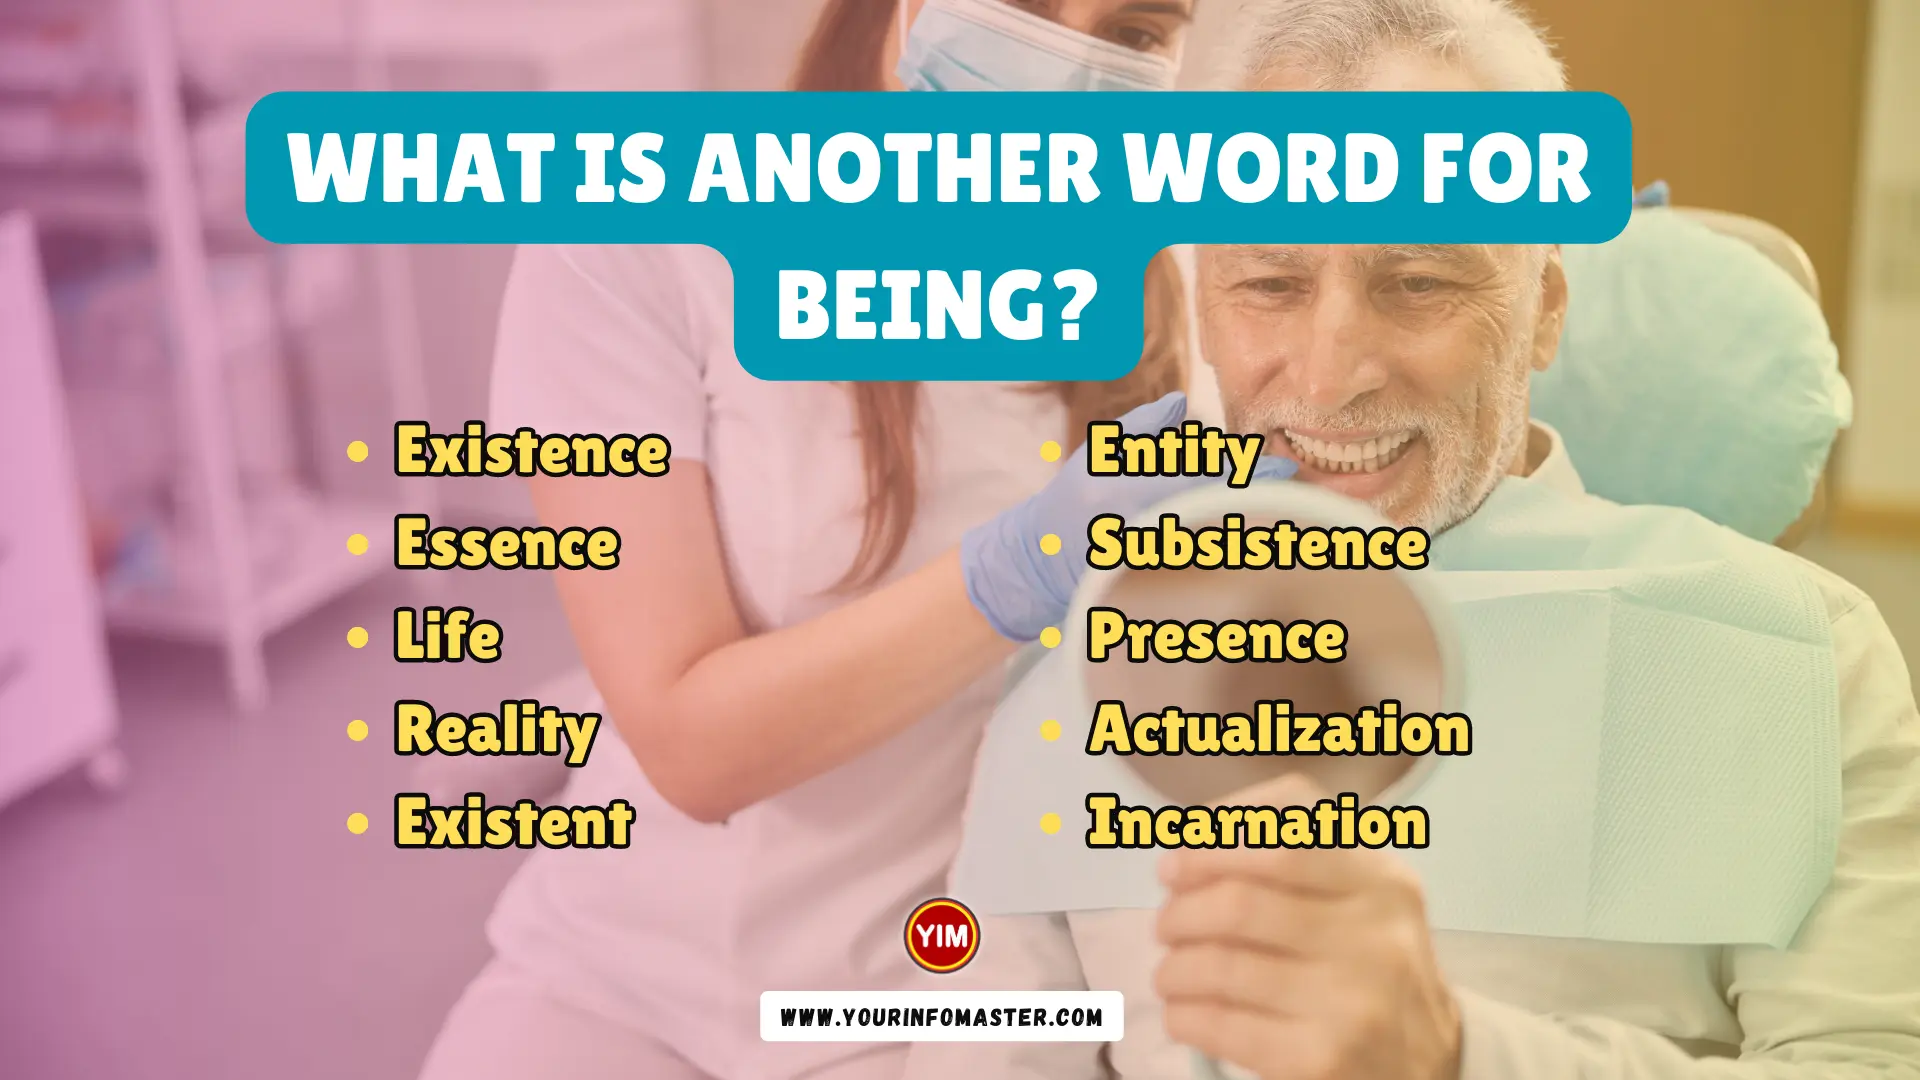 What is another word for Being